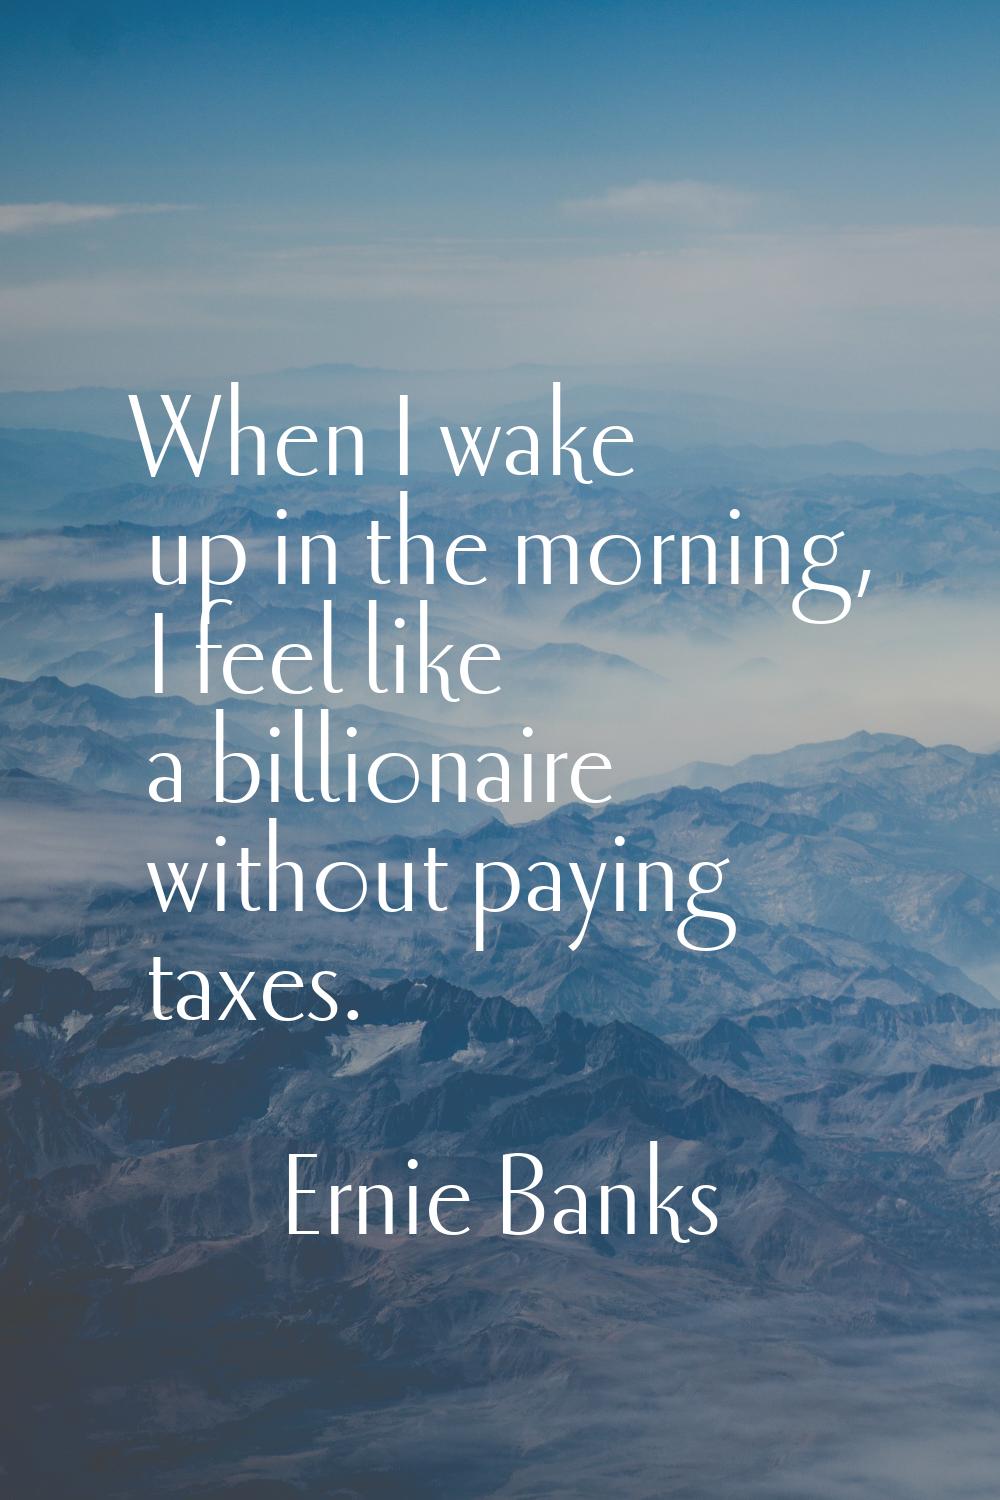 When I wake up in the morning, I feel like a billionaire without paying taxes.